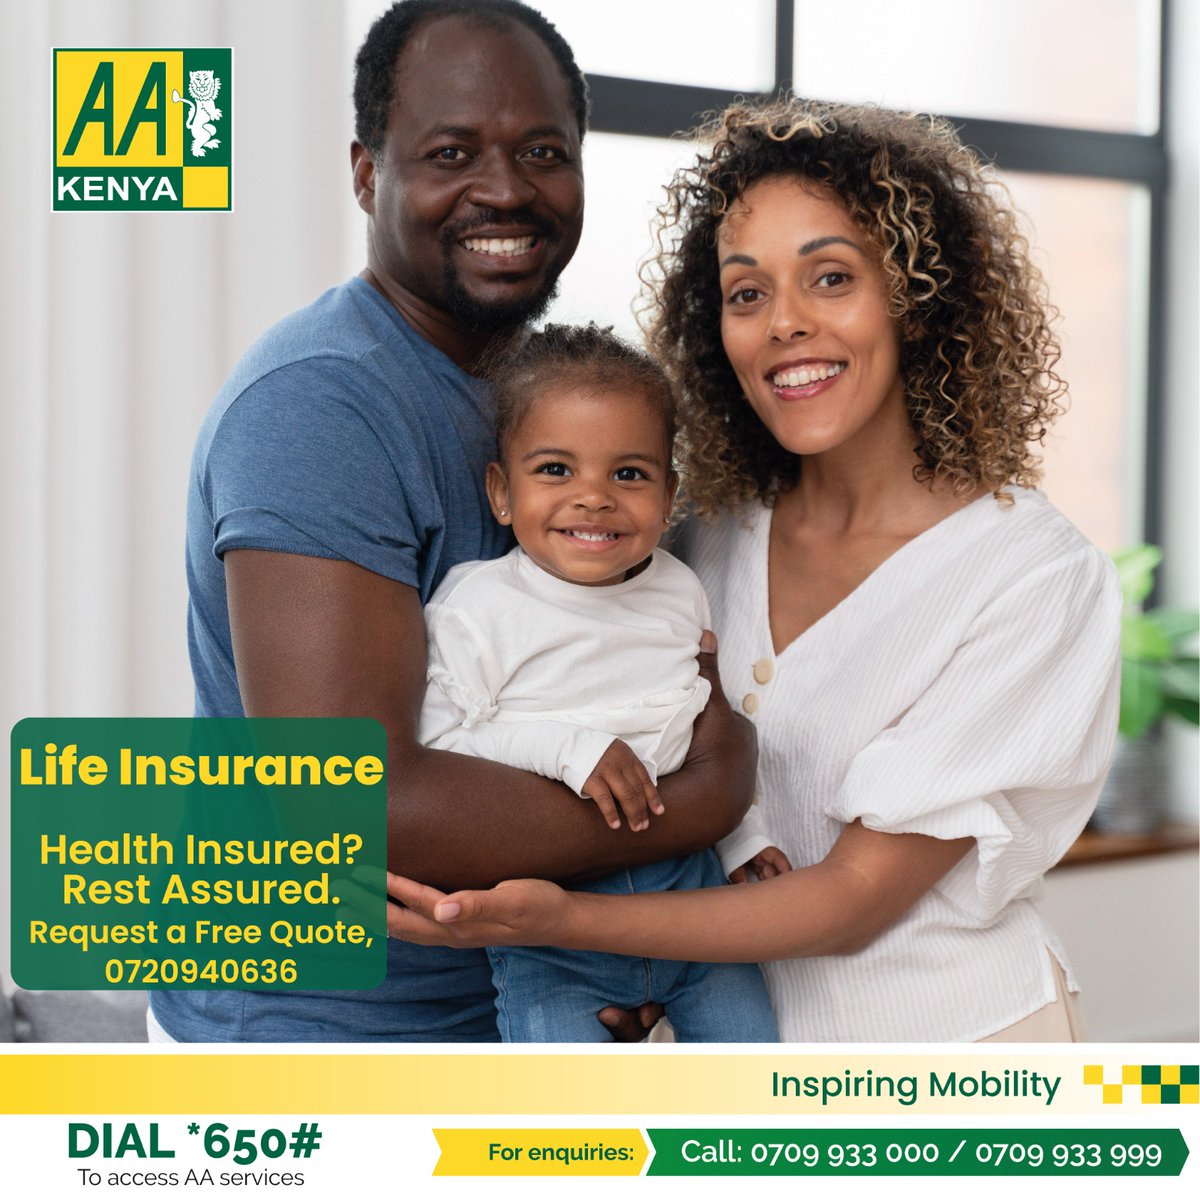 Life is unpredictable, but your family's security shouldn't be. Safeguard their future with the right life insurance plan. Request a Free Quote, call us on 0720940636
#AAIBCares